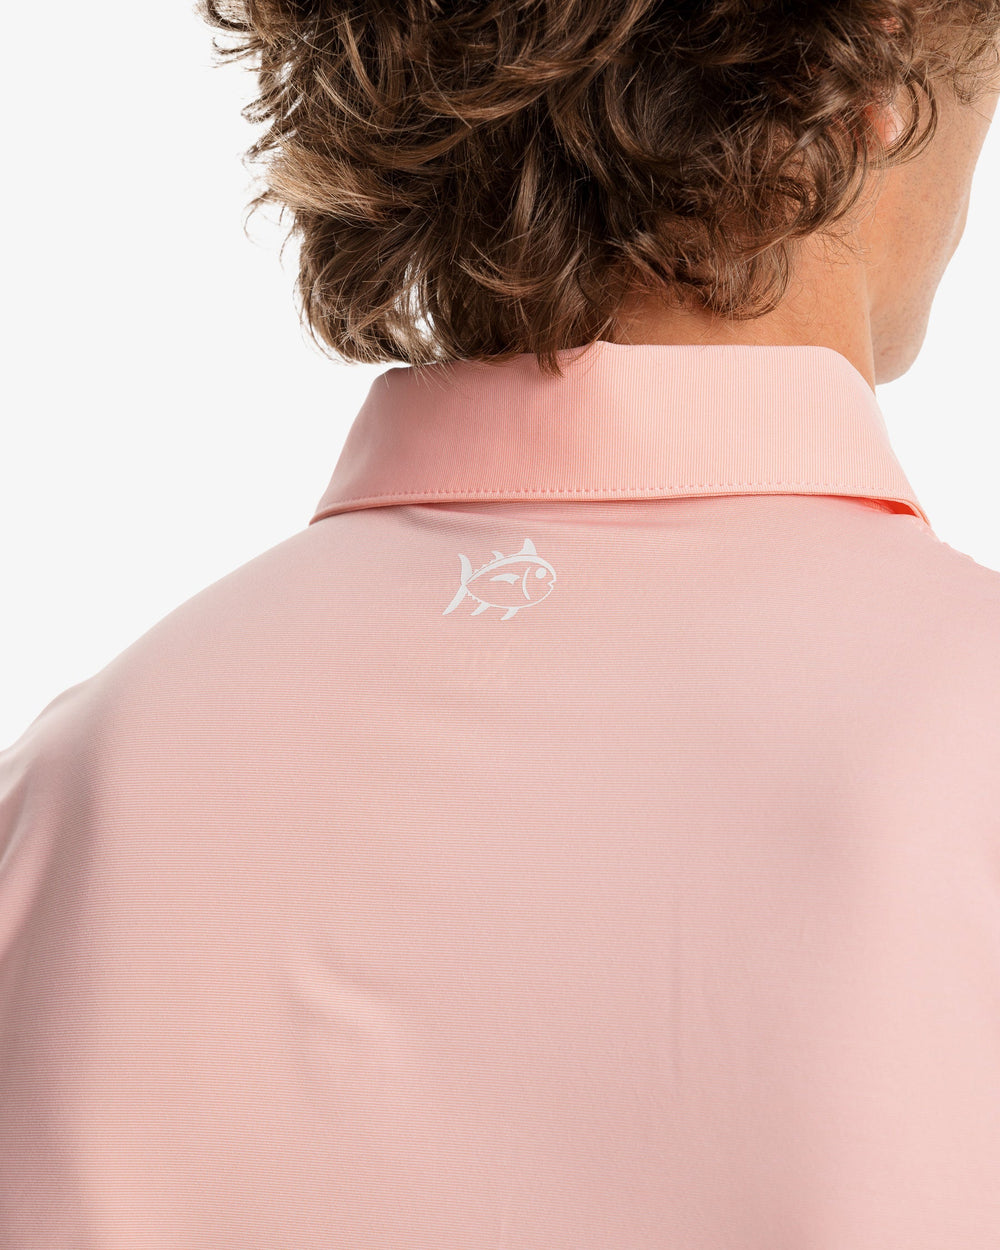 The model yoke view of the Men's Sawgrass Stripe brrr°®-eeze Performance Polo Shirt by Southern Tide - Sunbaked Sand